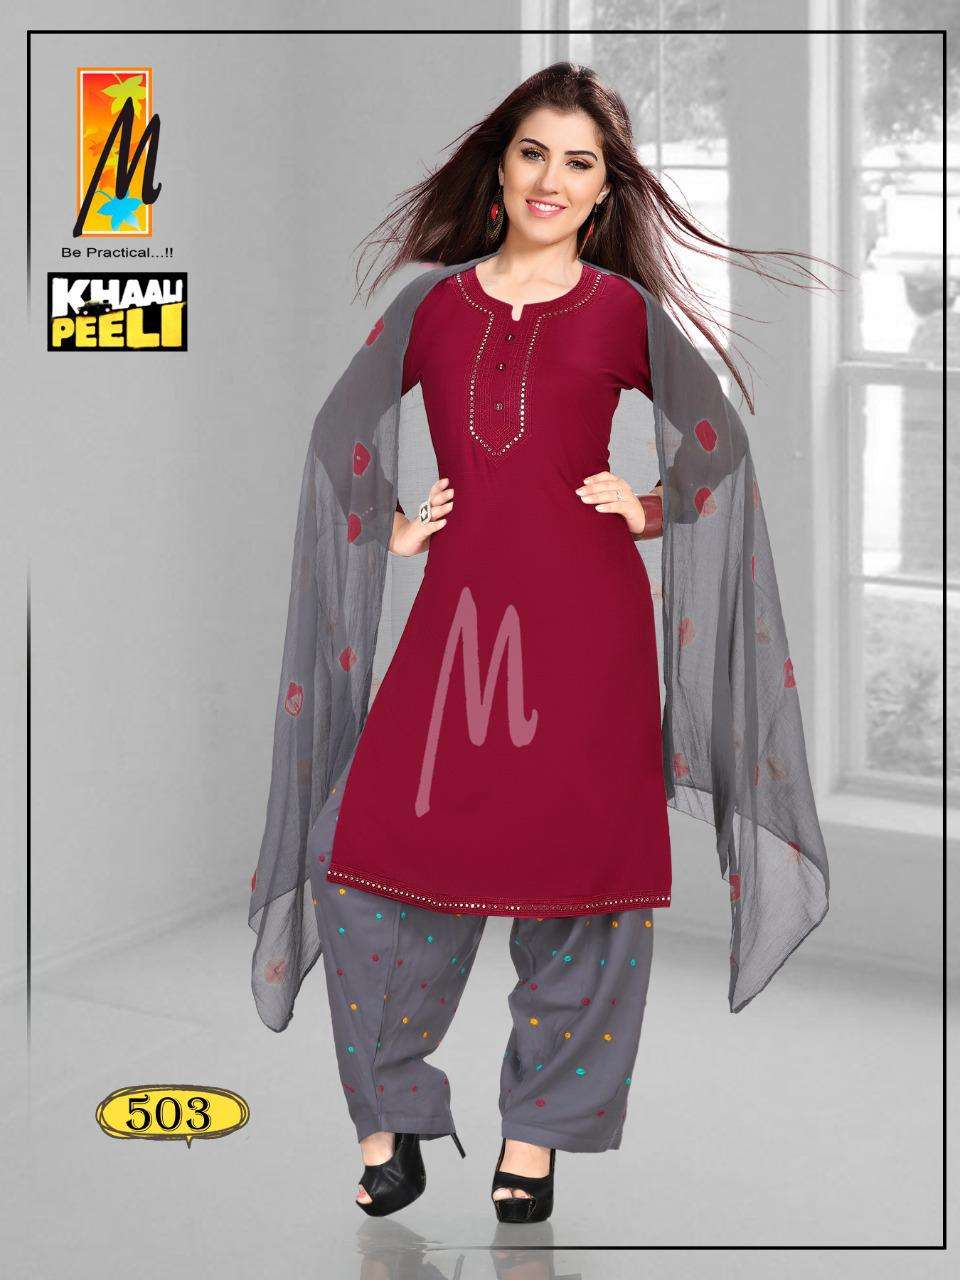 KHALI PEELI BY M BE PRACTICAL 501 TO 508 SERIES BEAUTIFUL SUITS COLORFUL STYLISH FANCY CASUAL WEAR & ETHNIC WEAR RAYON WORK DRESSES AT WHOLESALE PRICE